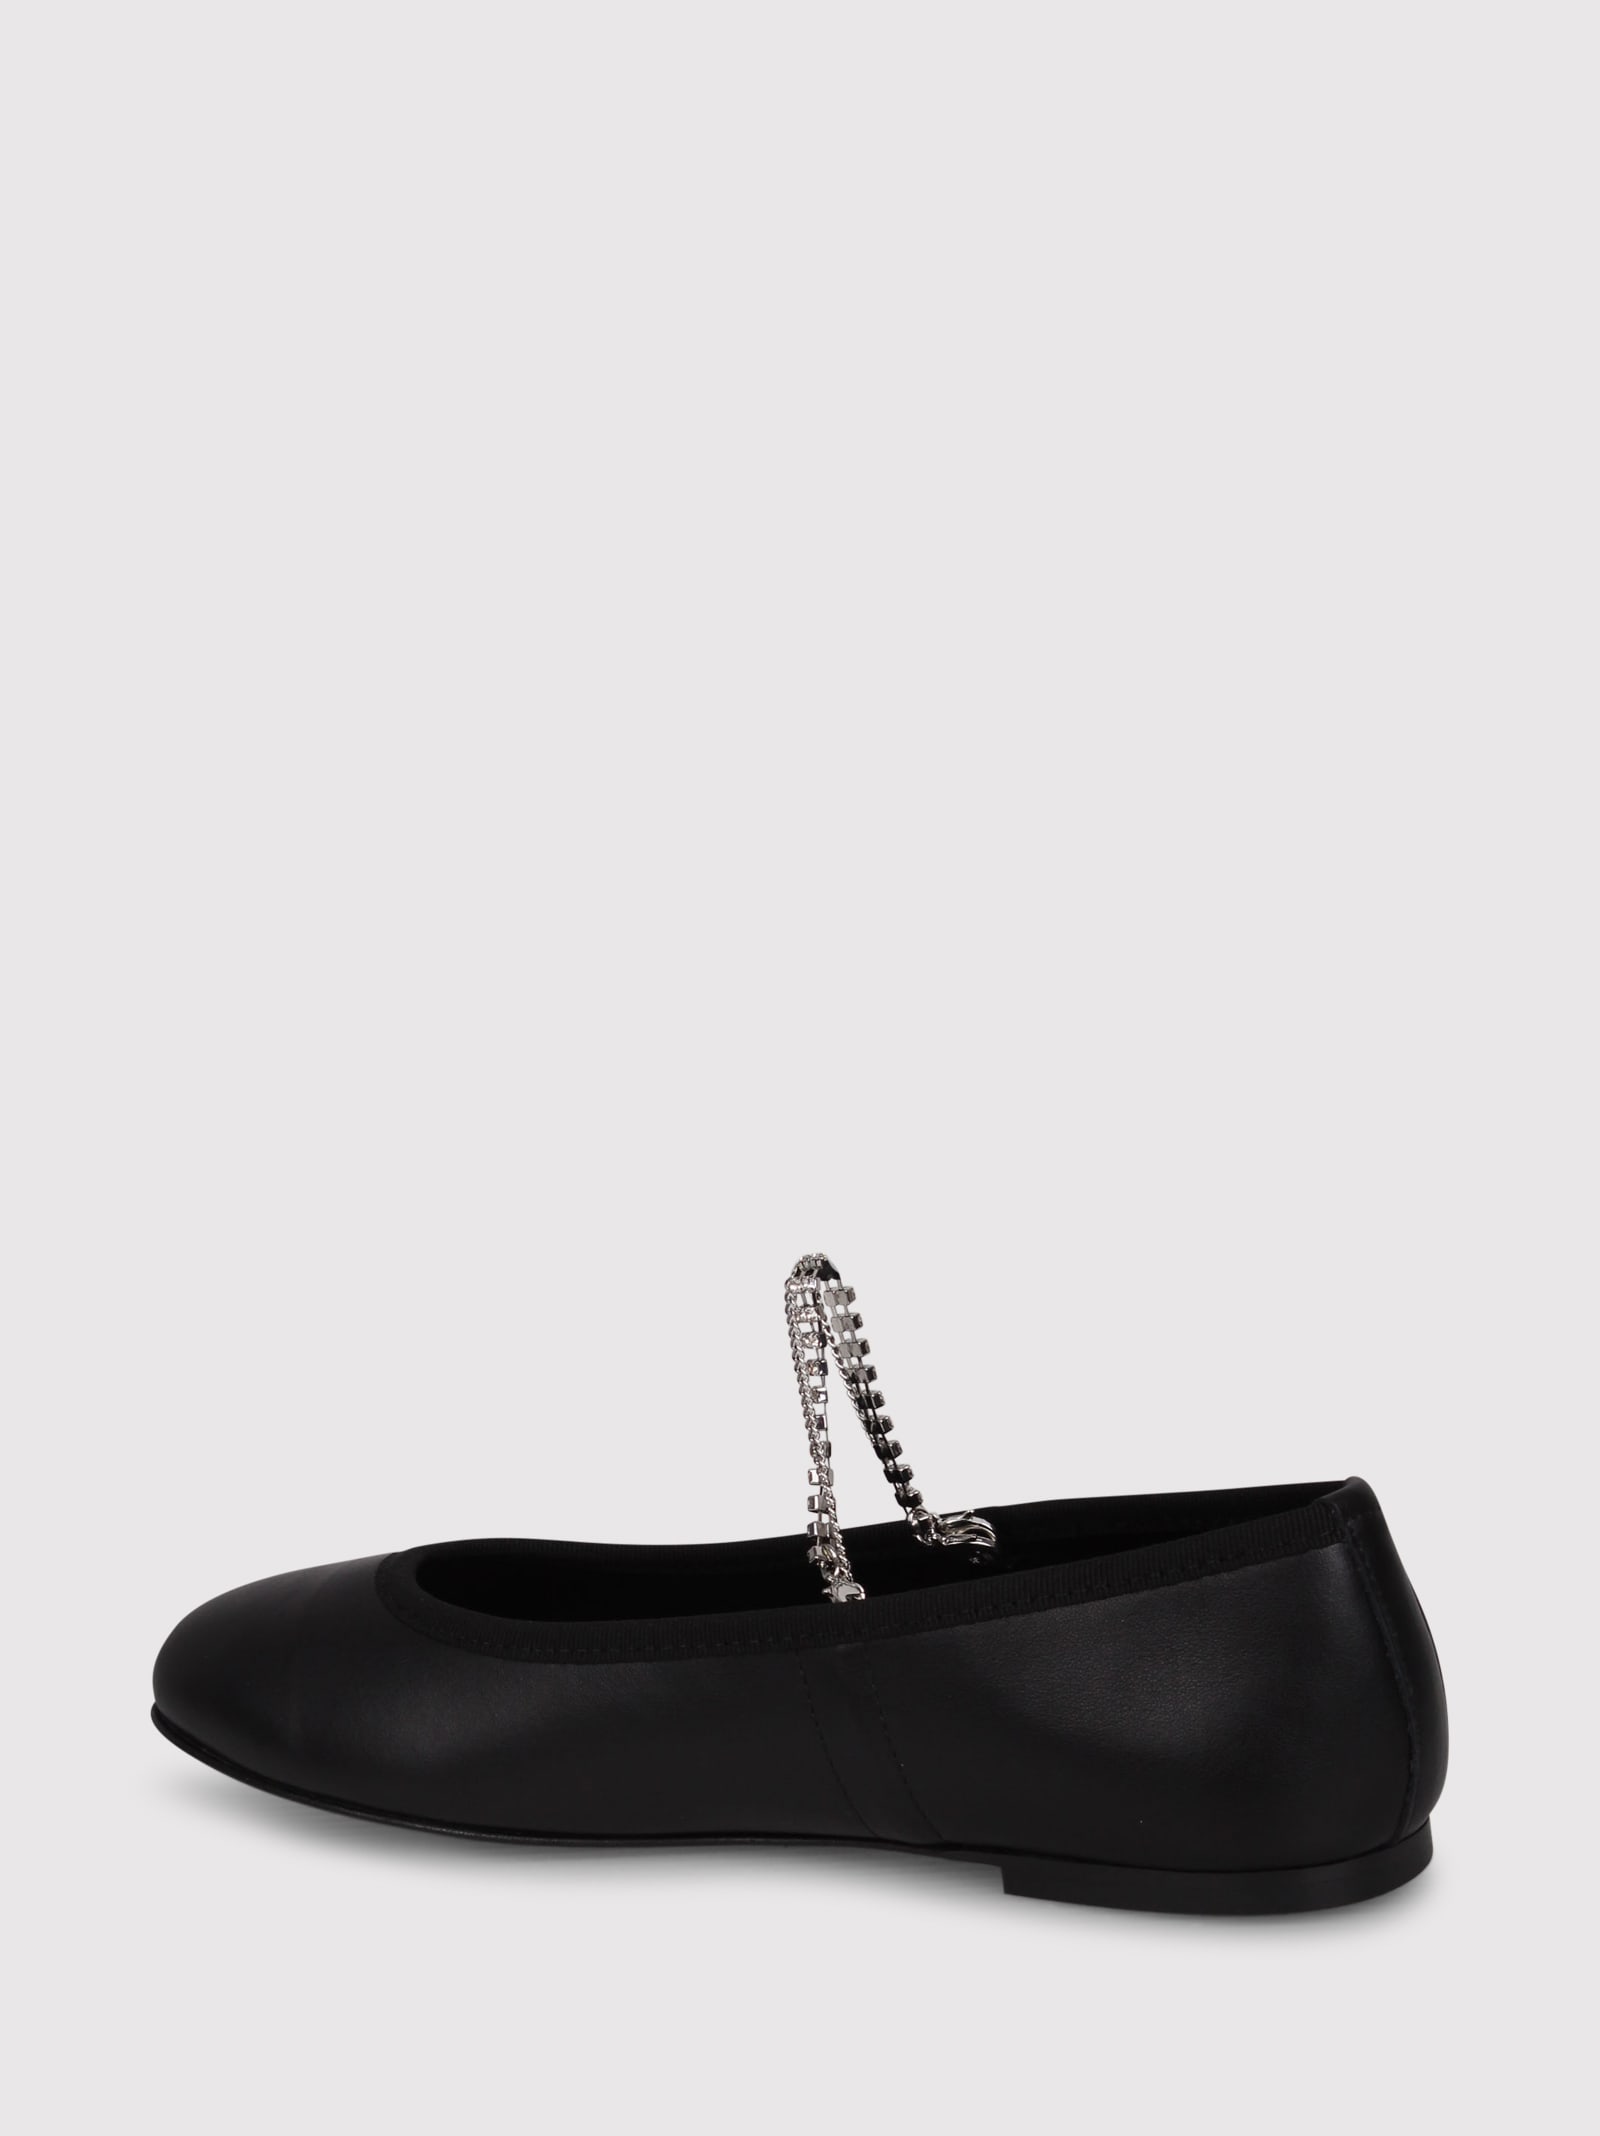 Shop Kate Cate Juliette Leather Ballerina Shoes